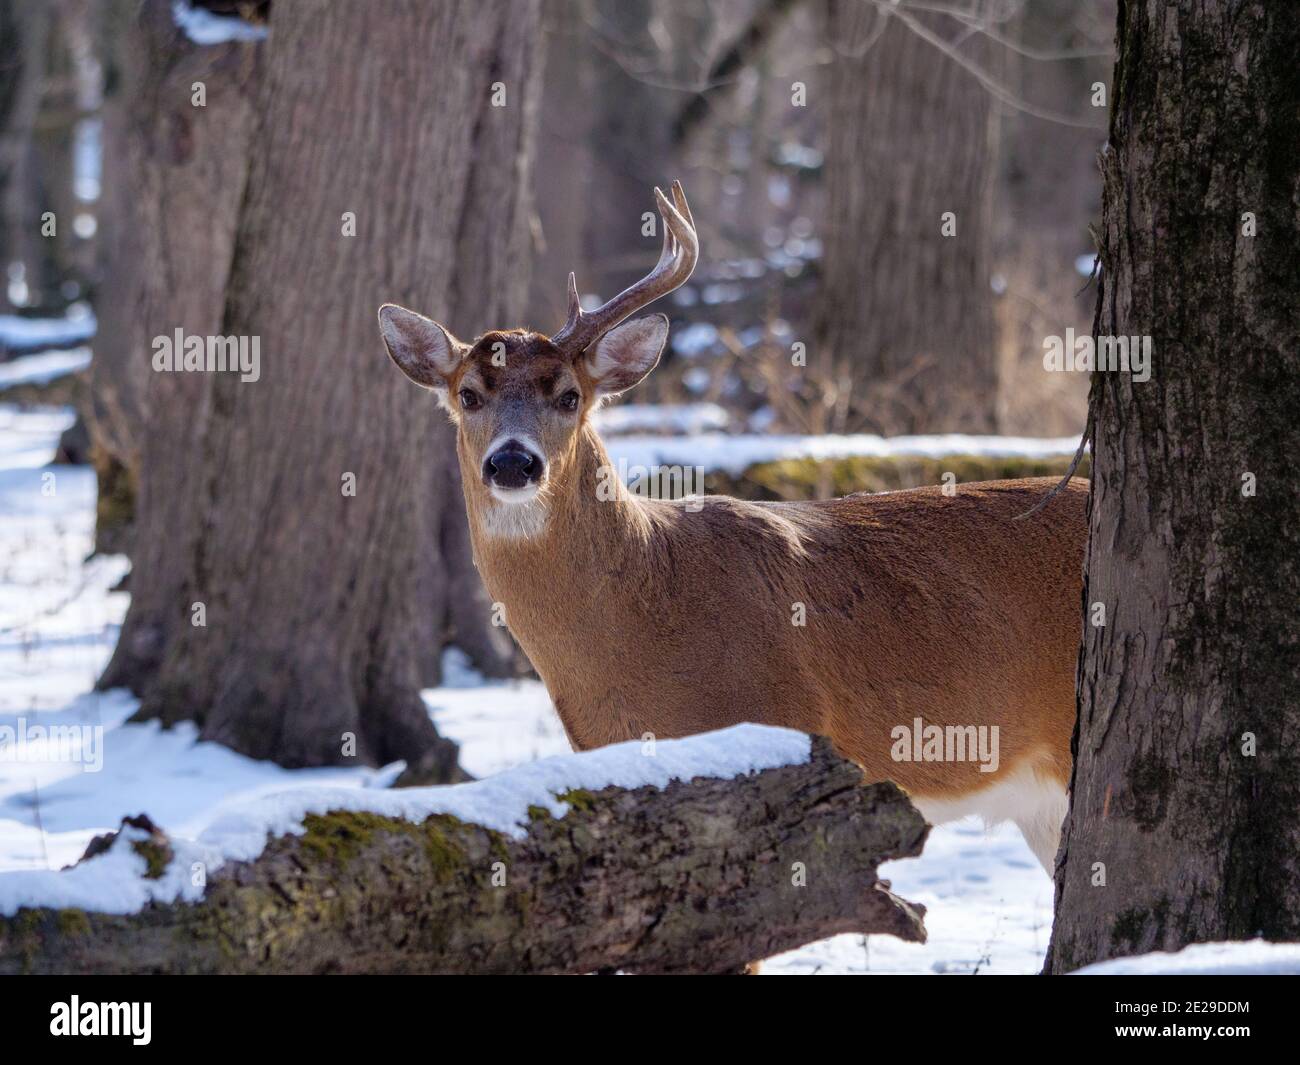 White-tailed deer buck with one antler missing. Cook County, Illinois. Male white-tailed deer shed their antlers after the breeding season. Stock Photo